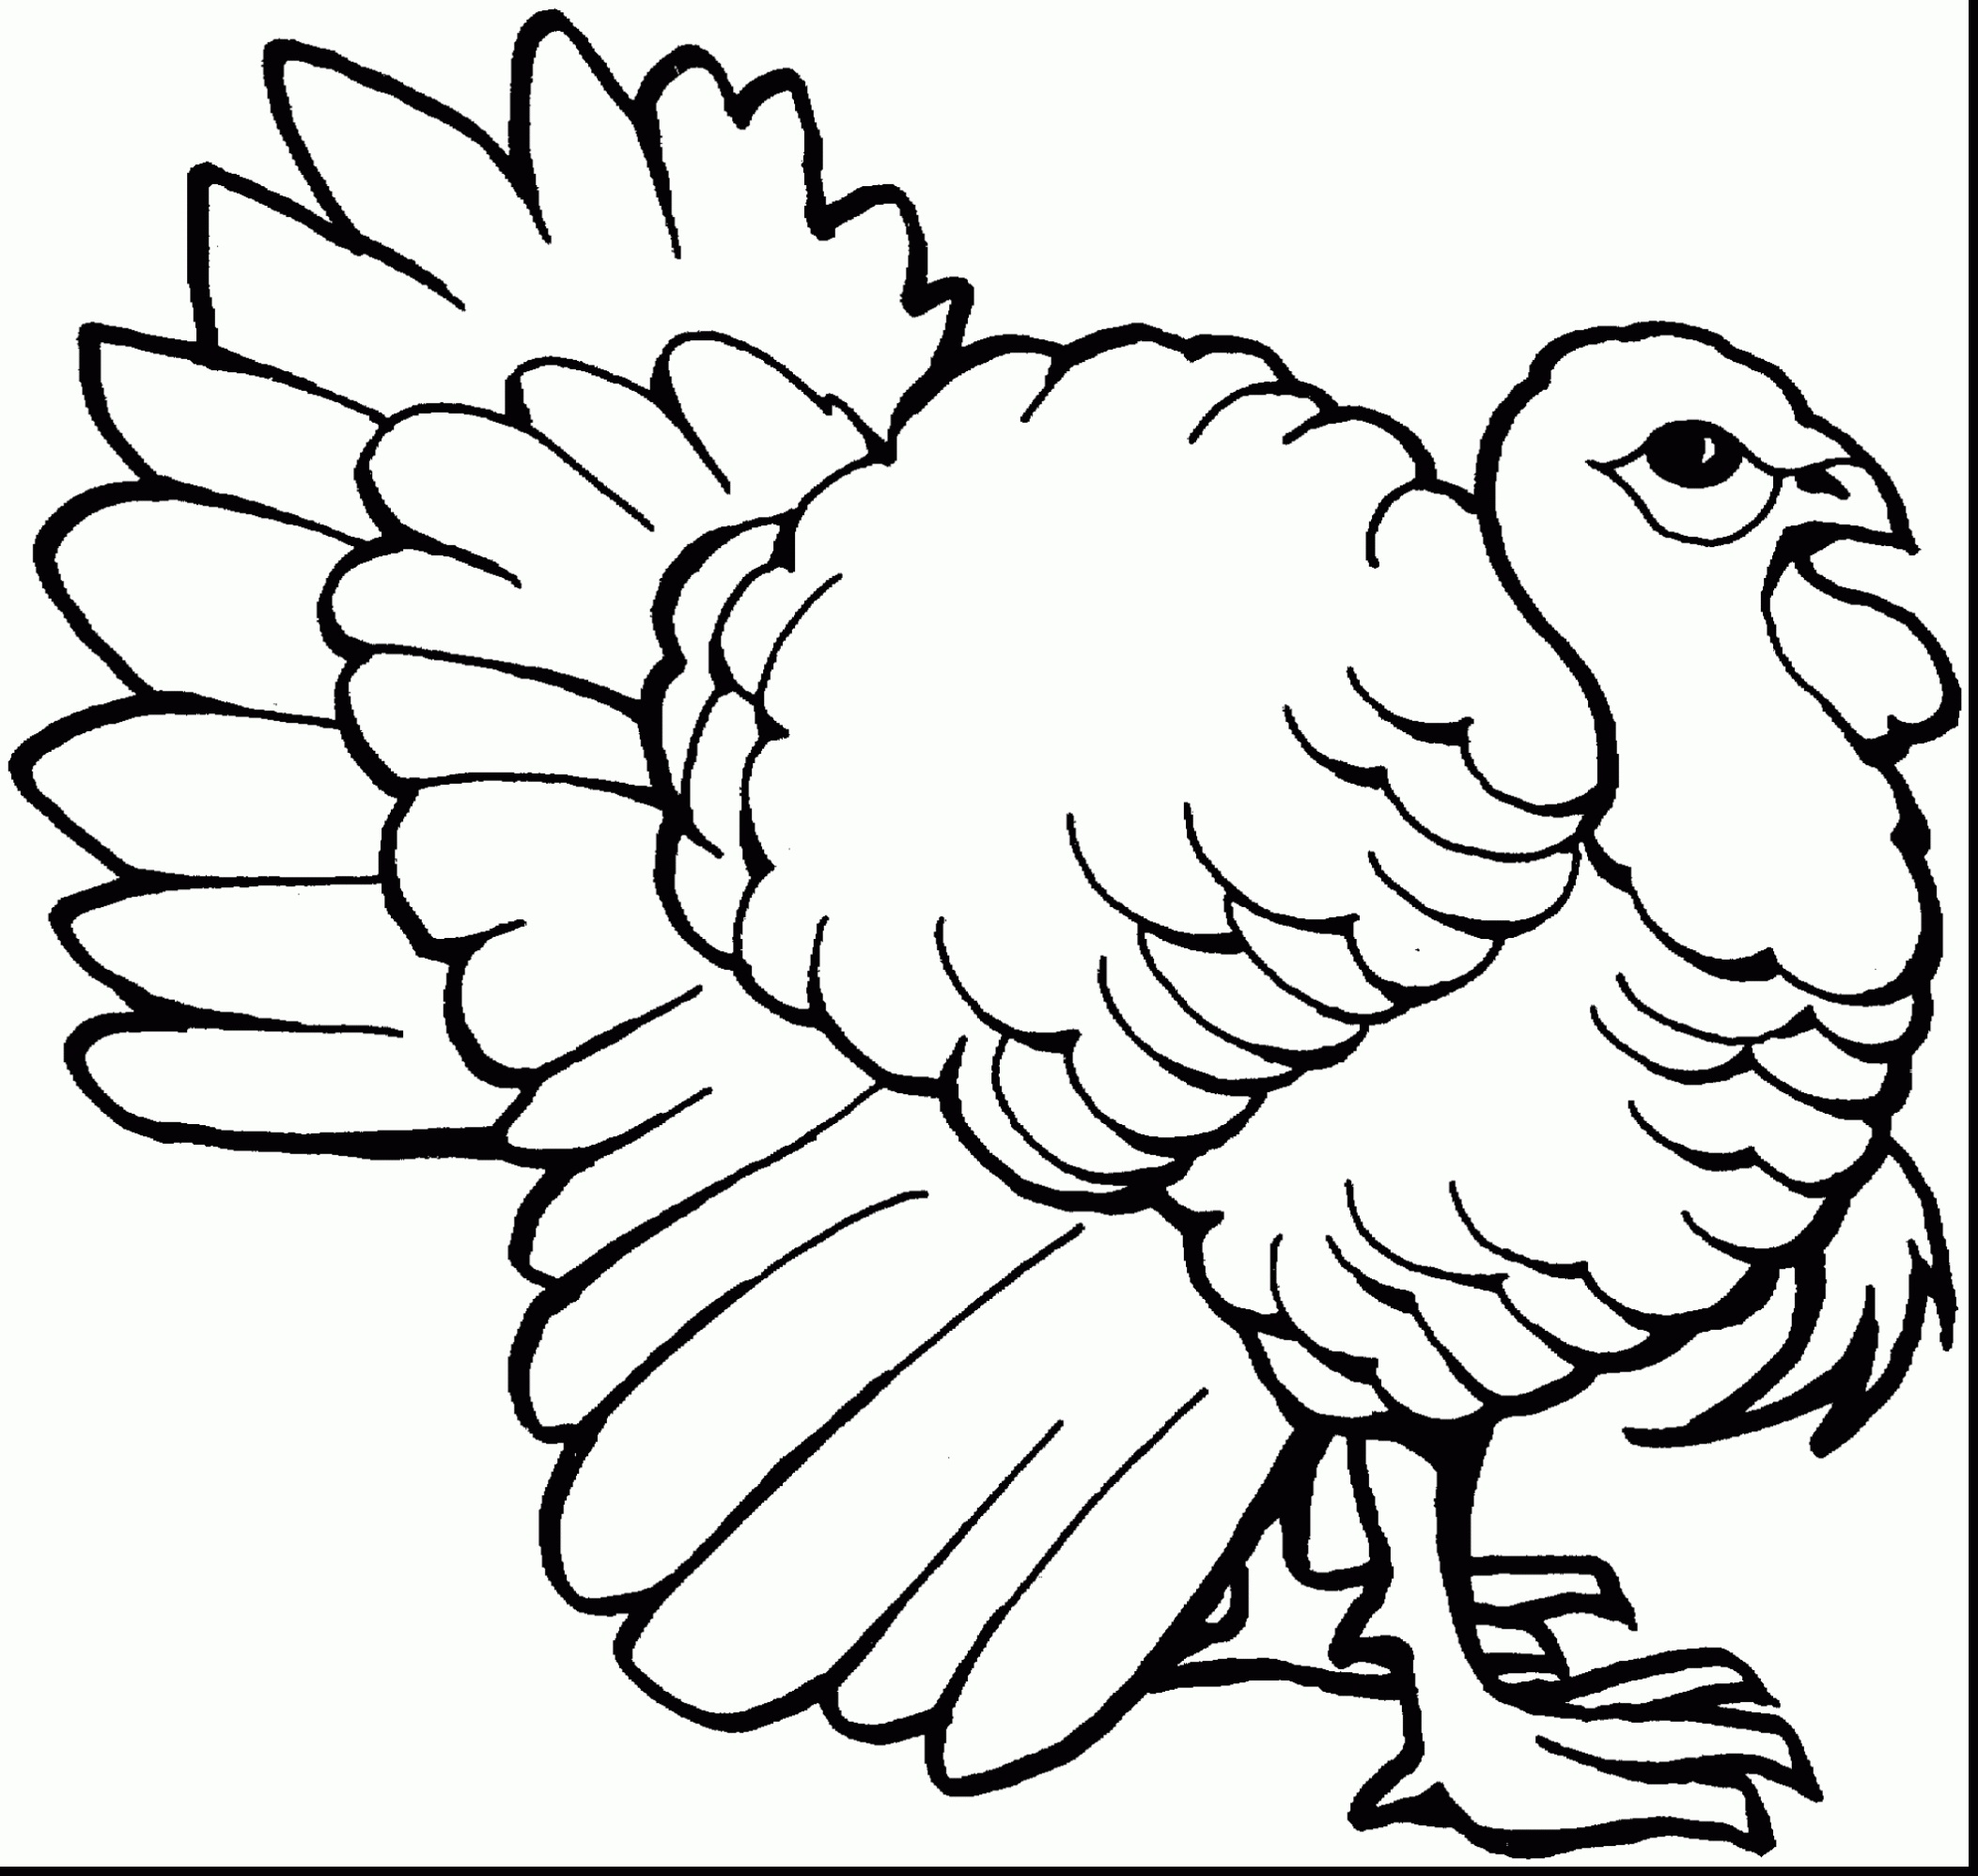 Coloring Ideas : Kidsoring Turkey Page Thanksgiving Books For First - Free Printable Thanksgiving Books